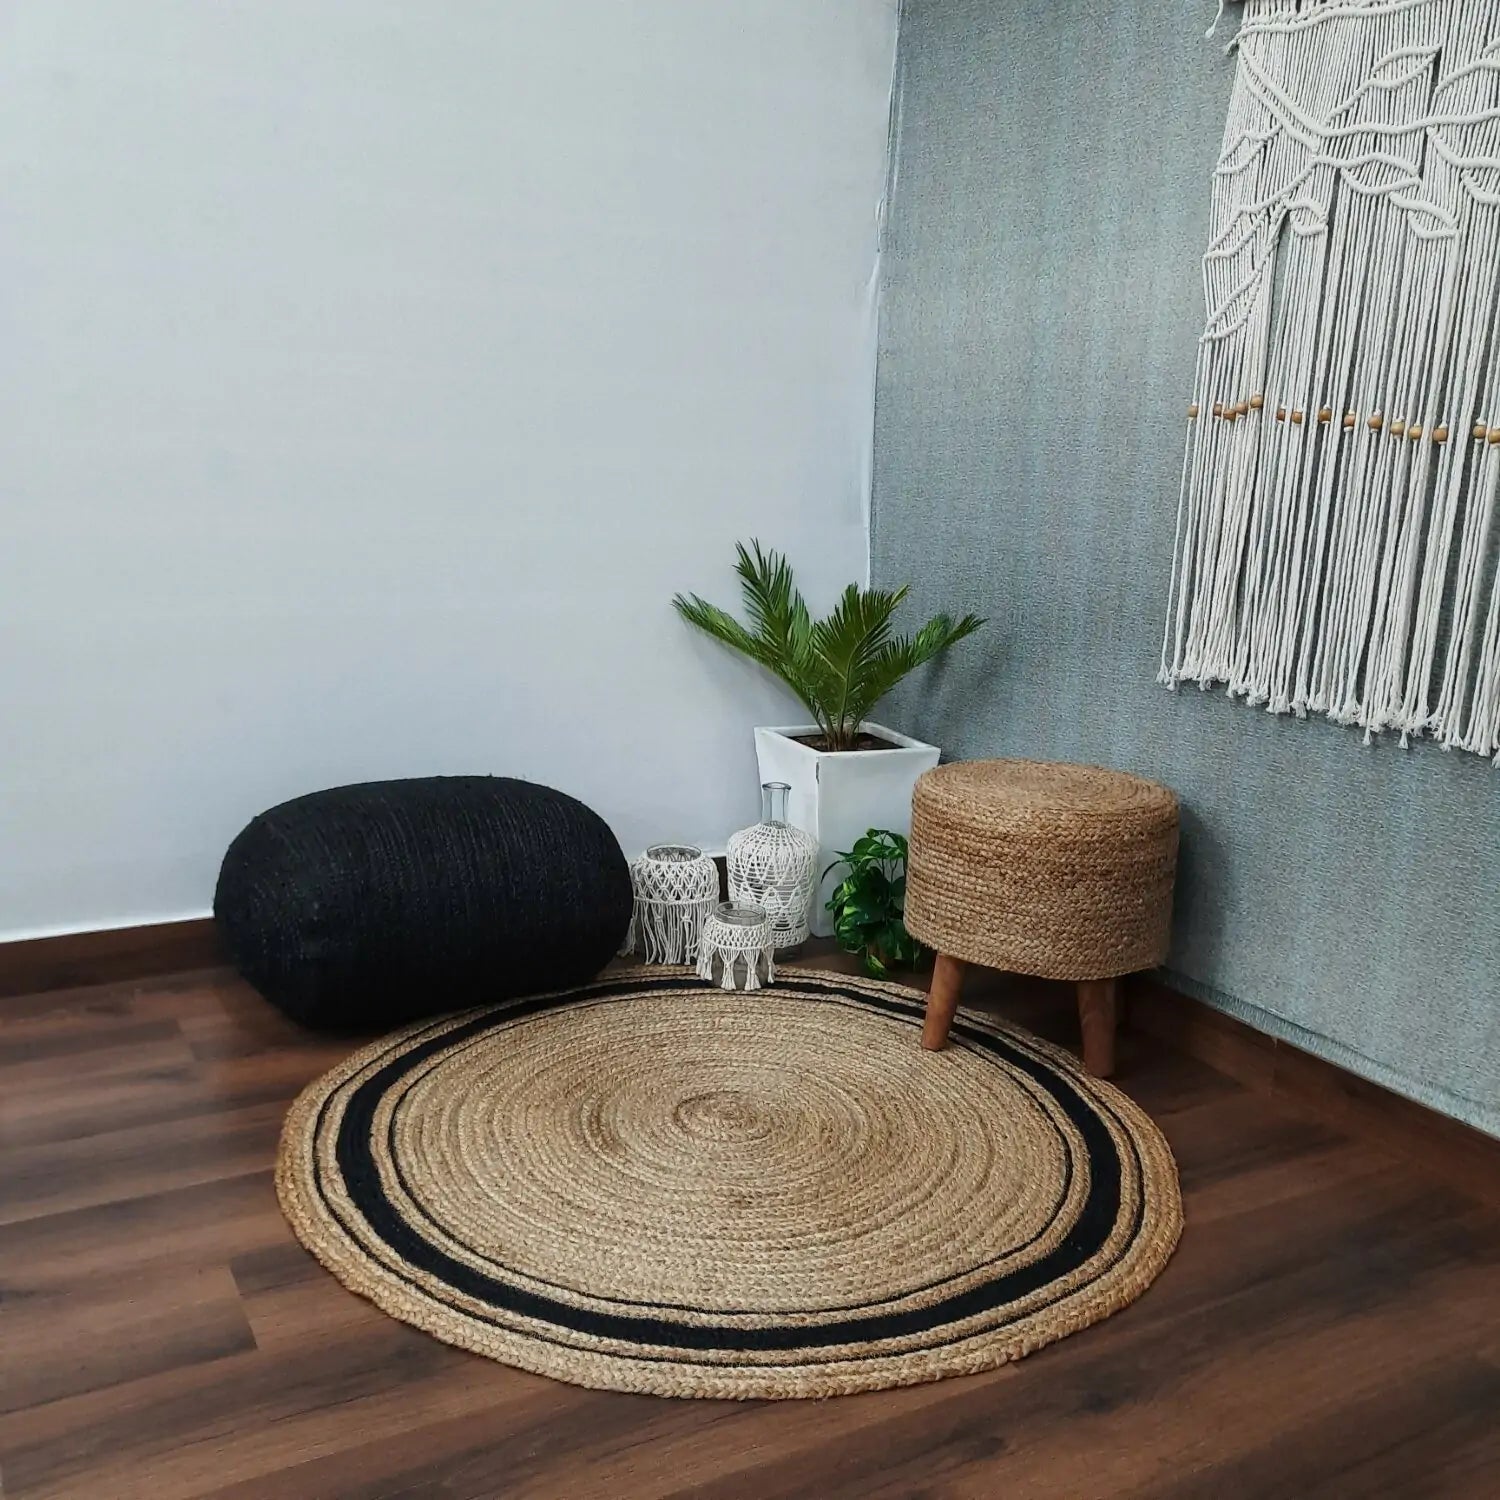 Avioni Home Eco Collection – Handwoven Braided Jute Round Carpet